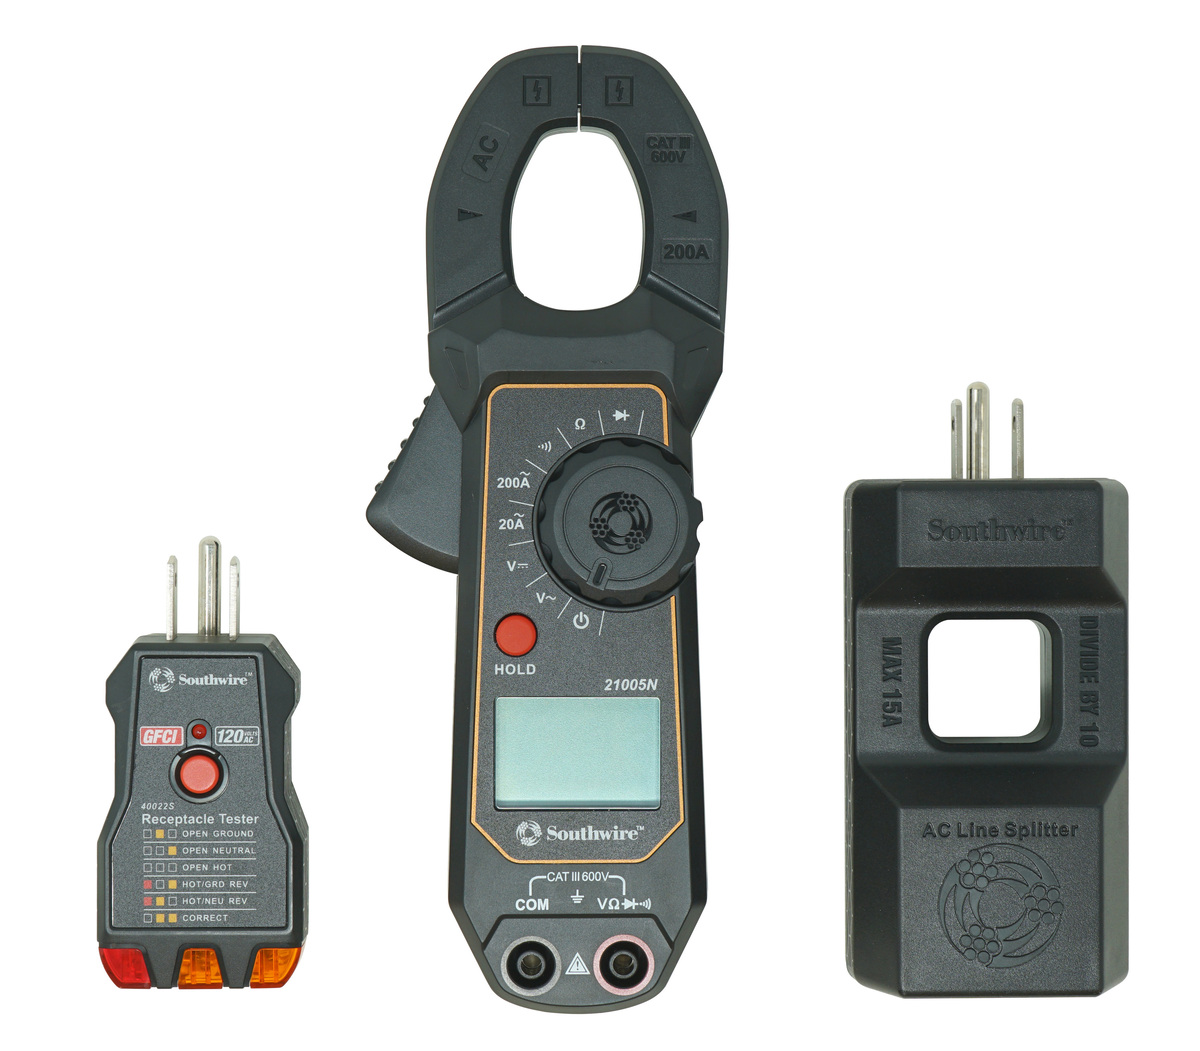 Clamp Meter Kit consisting of 200A AC clamp meter, AC Line Splitter, and 120V AC GFCI Receptacle Tester